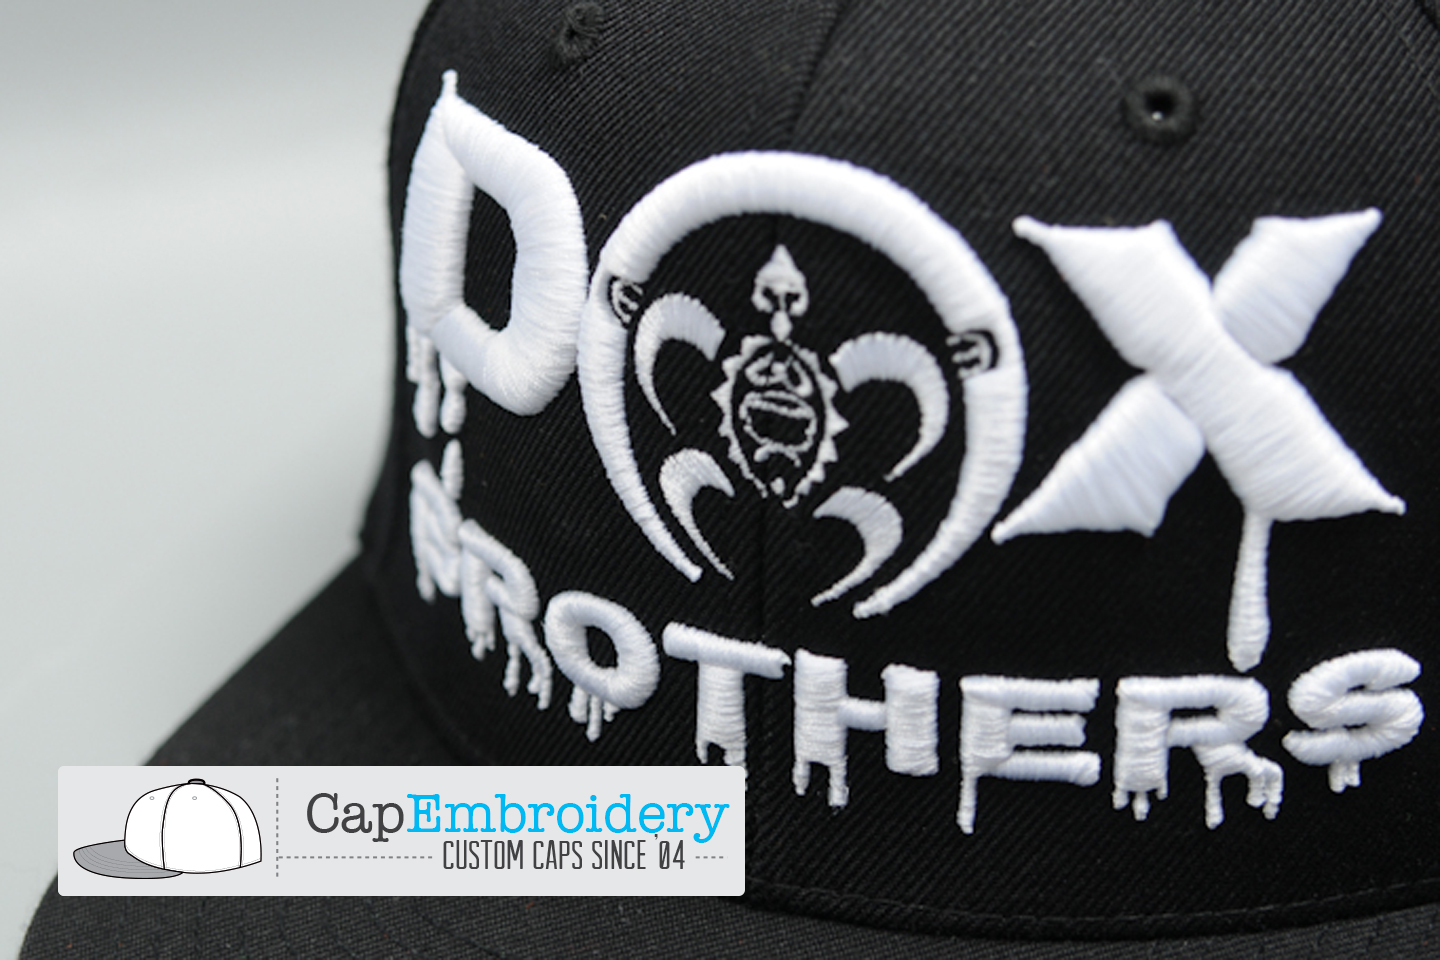 Custom Cap embroidery with large 3d embroidery